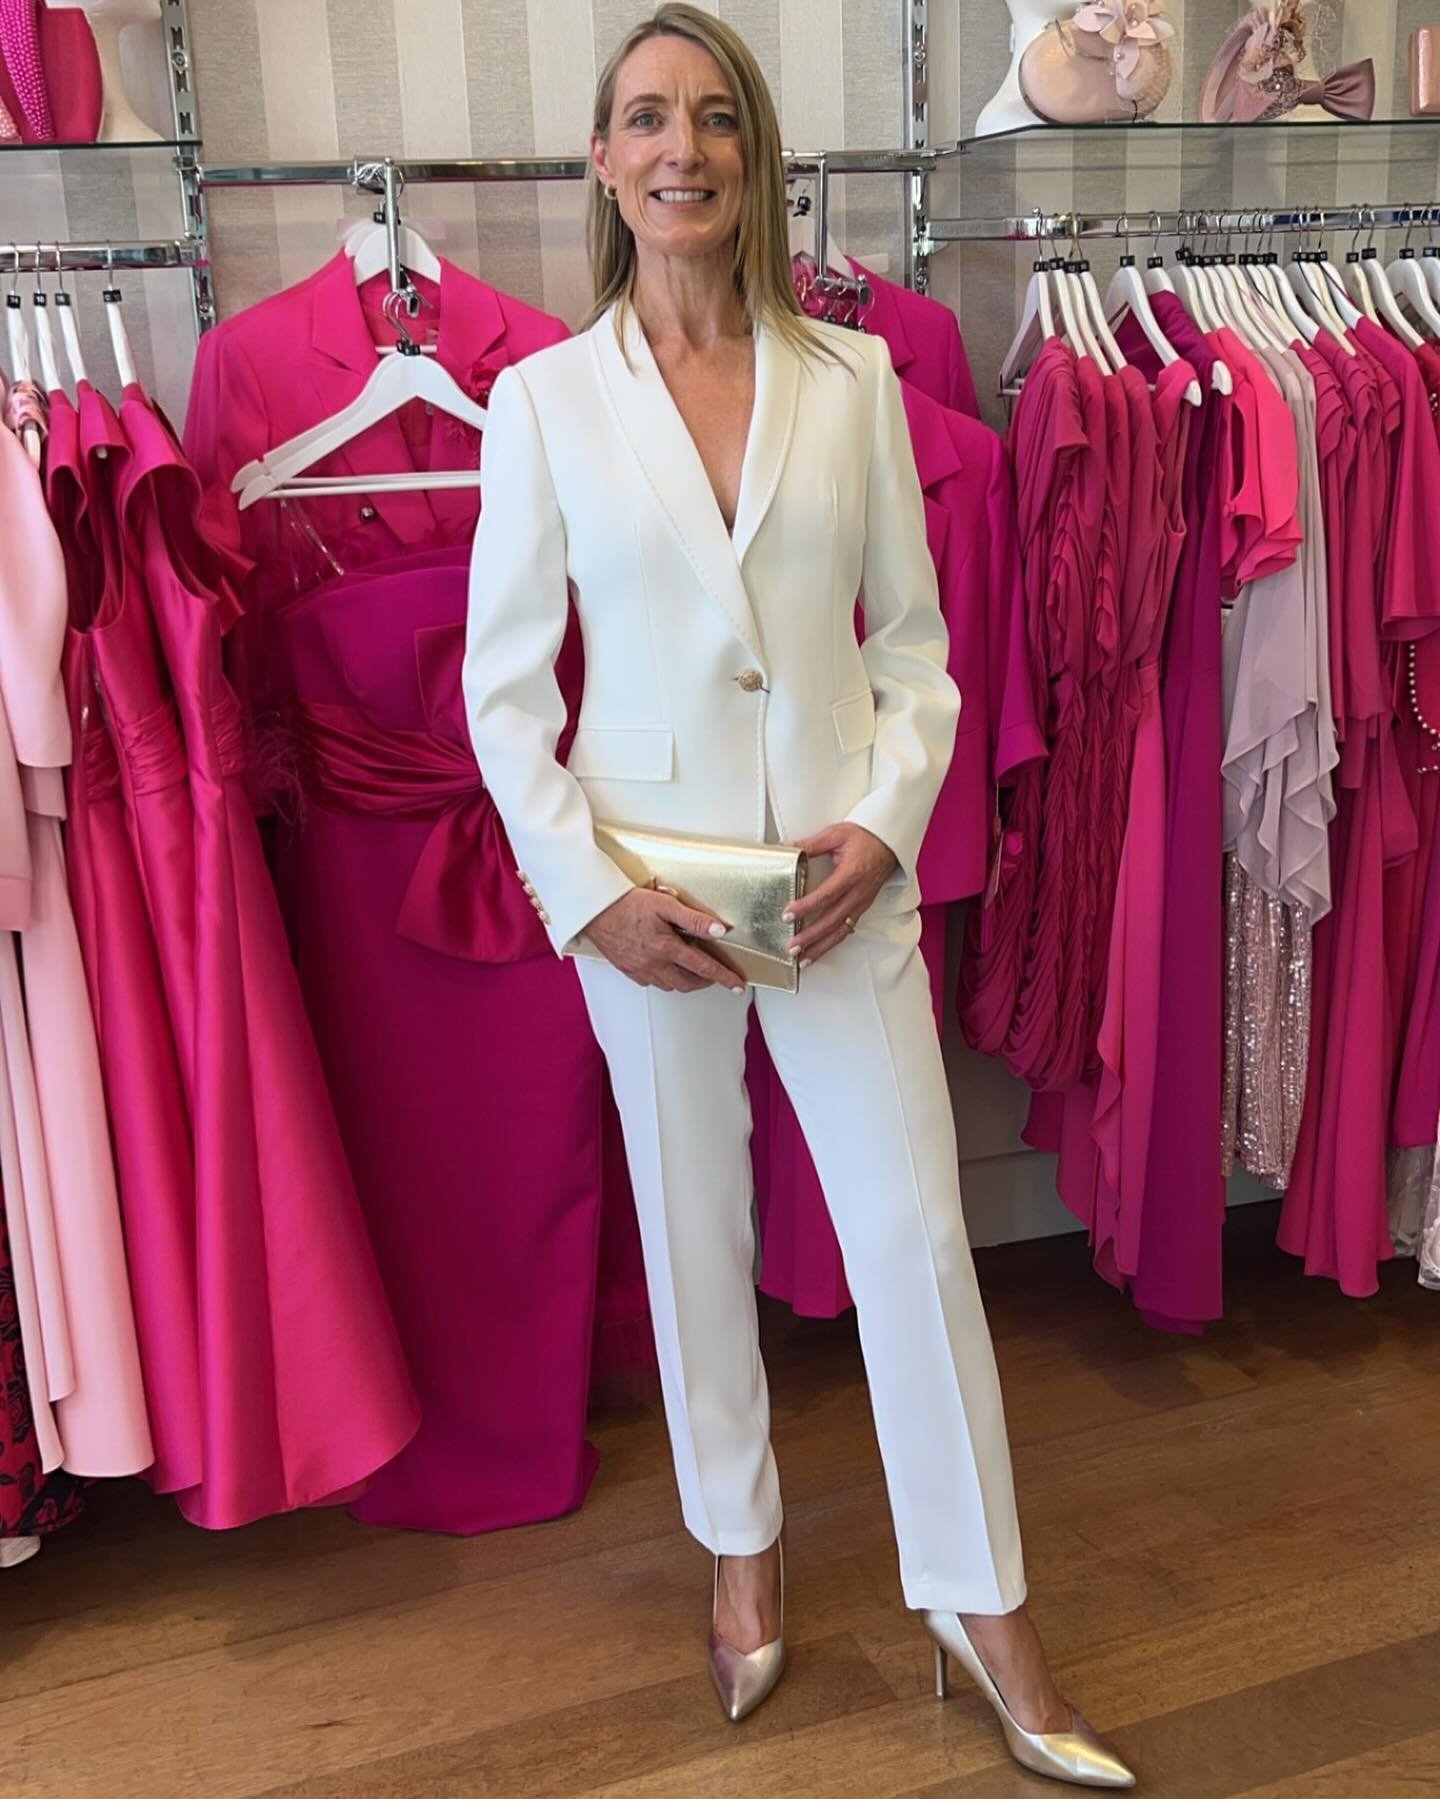 🥂🤍✨ New&hellip;Classic White Tailored Suit. 
You can never go wrong for that special event or corporate event in a white suit. This style is tailored so well and the fabric is 👌

Lottie Suit &euro;344

Shop online now or visit us in store
Fiona x
